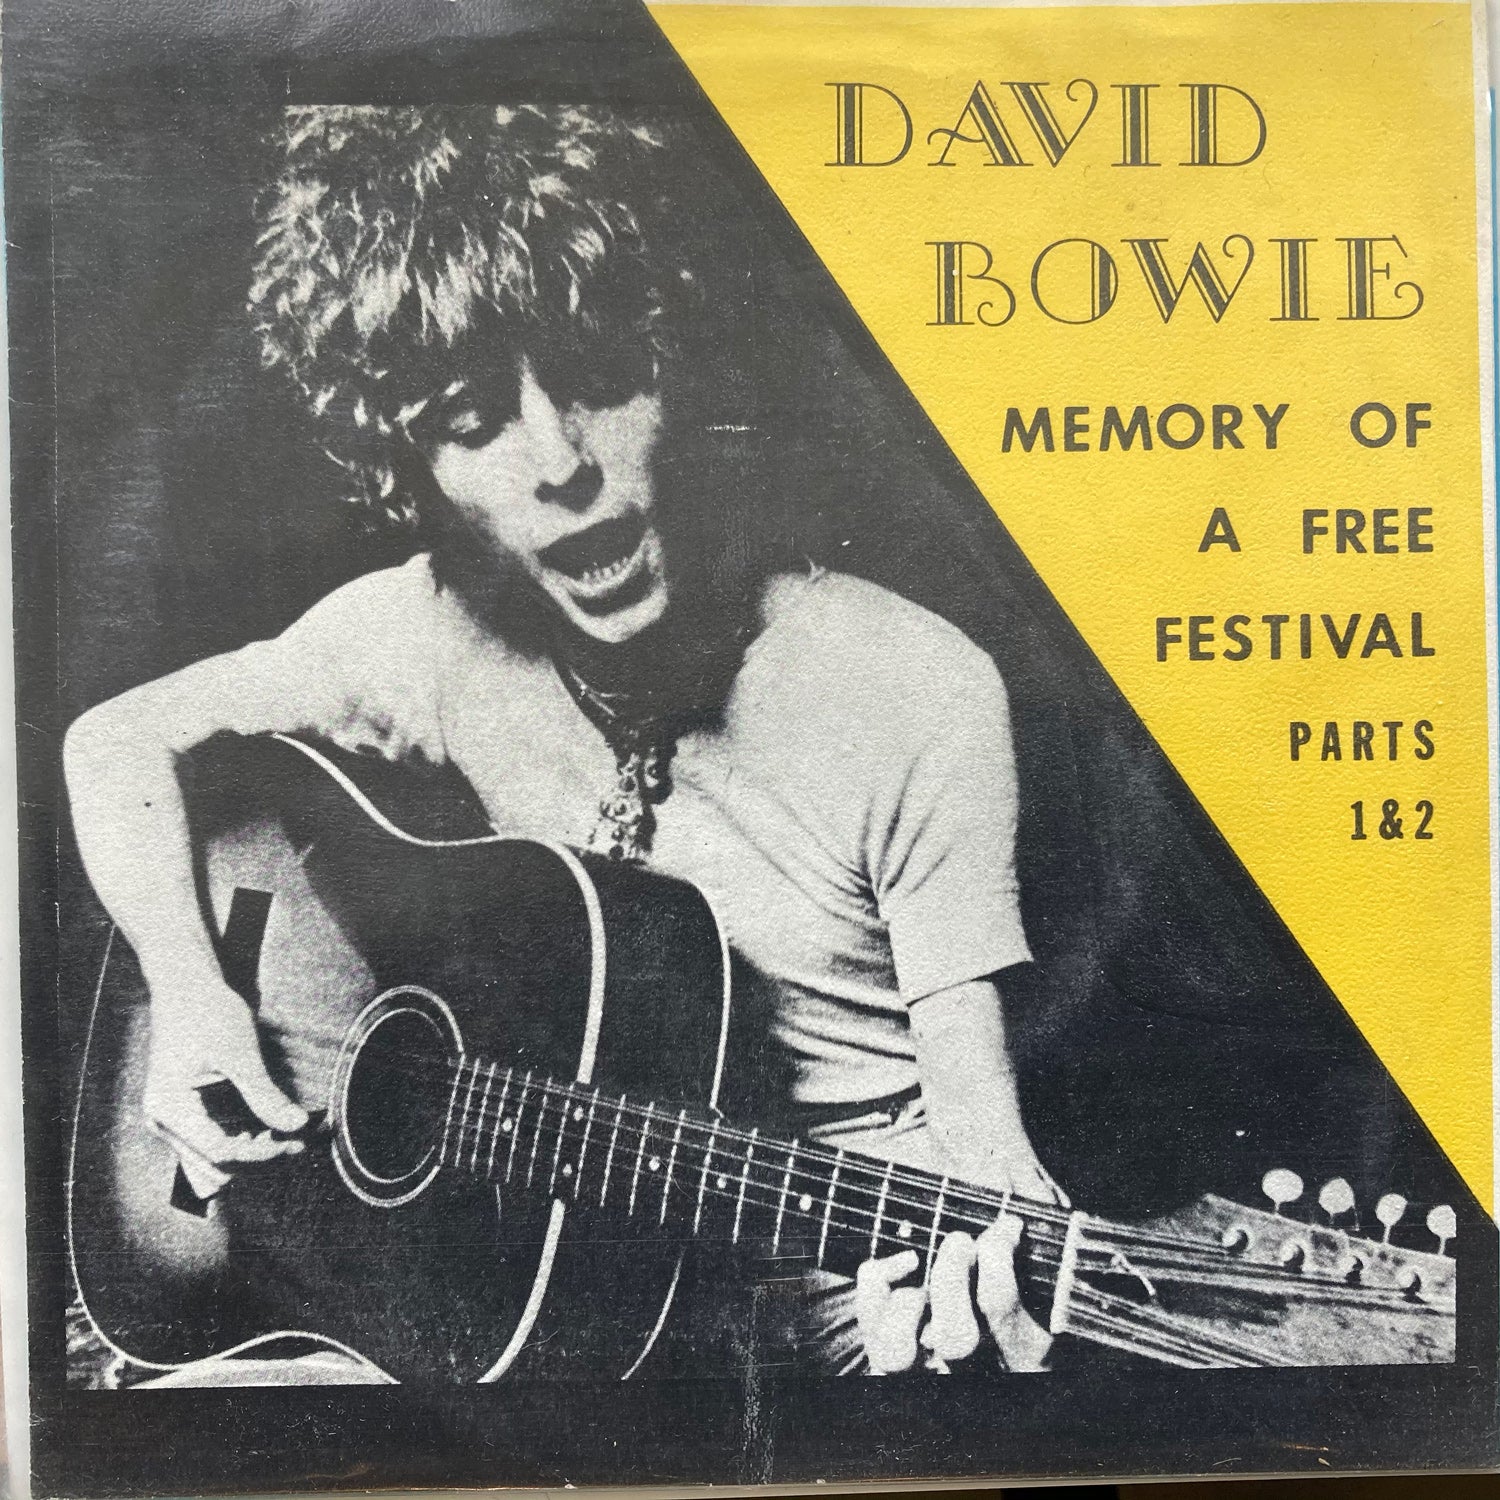 David Bowie - Memory Of A Free Festival parts 1 & 2 (7")